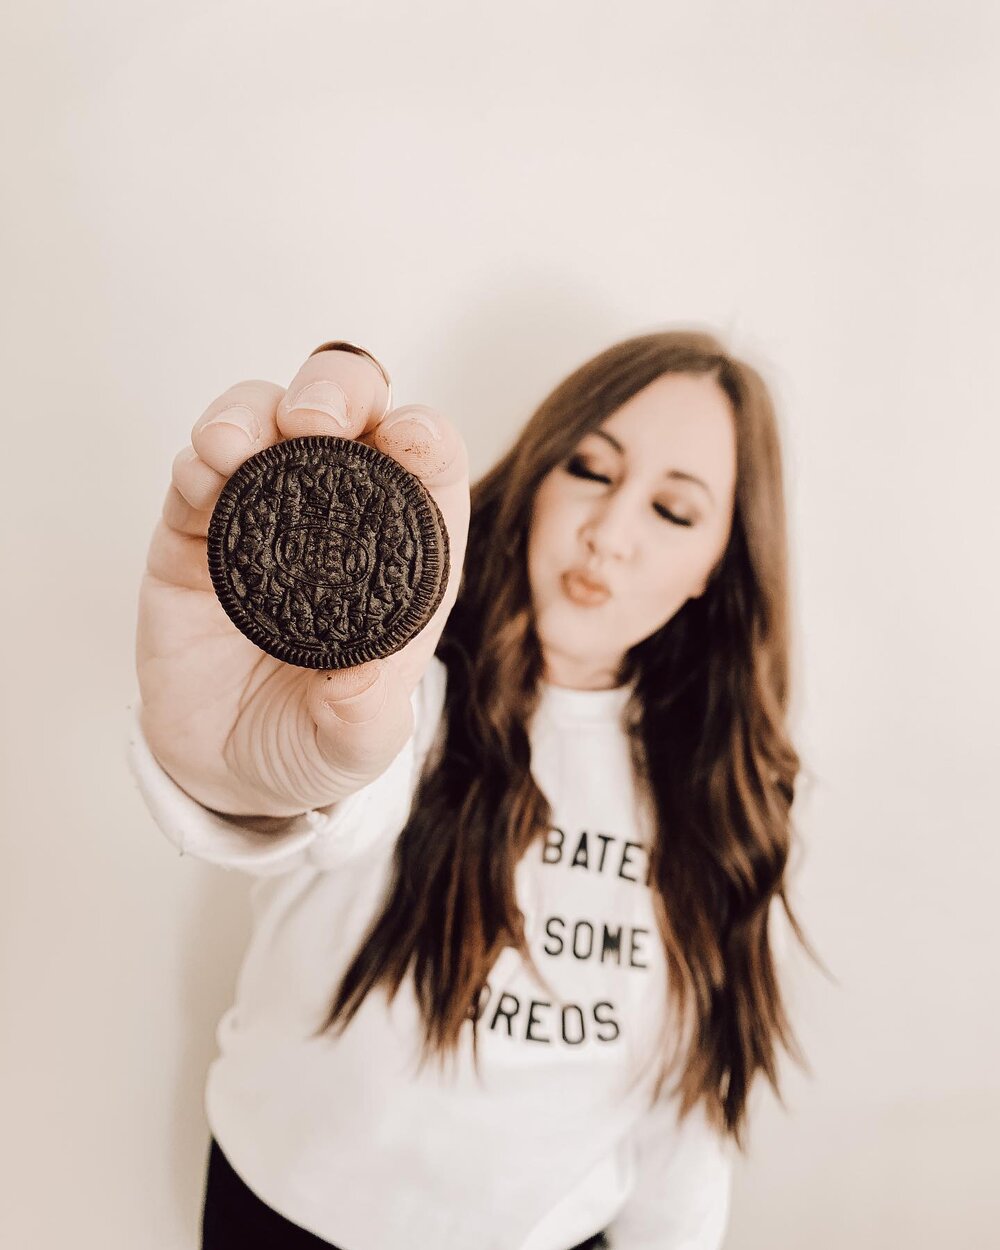 It&rsquo;s national oreo day y&rsquo;all! 🖤🤍🖤 celebrating my fave sweet treat today and most days lol #nationaloreoday